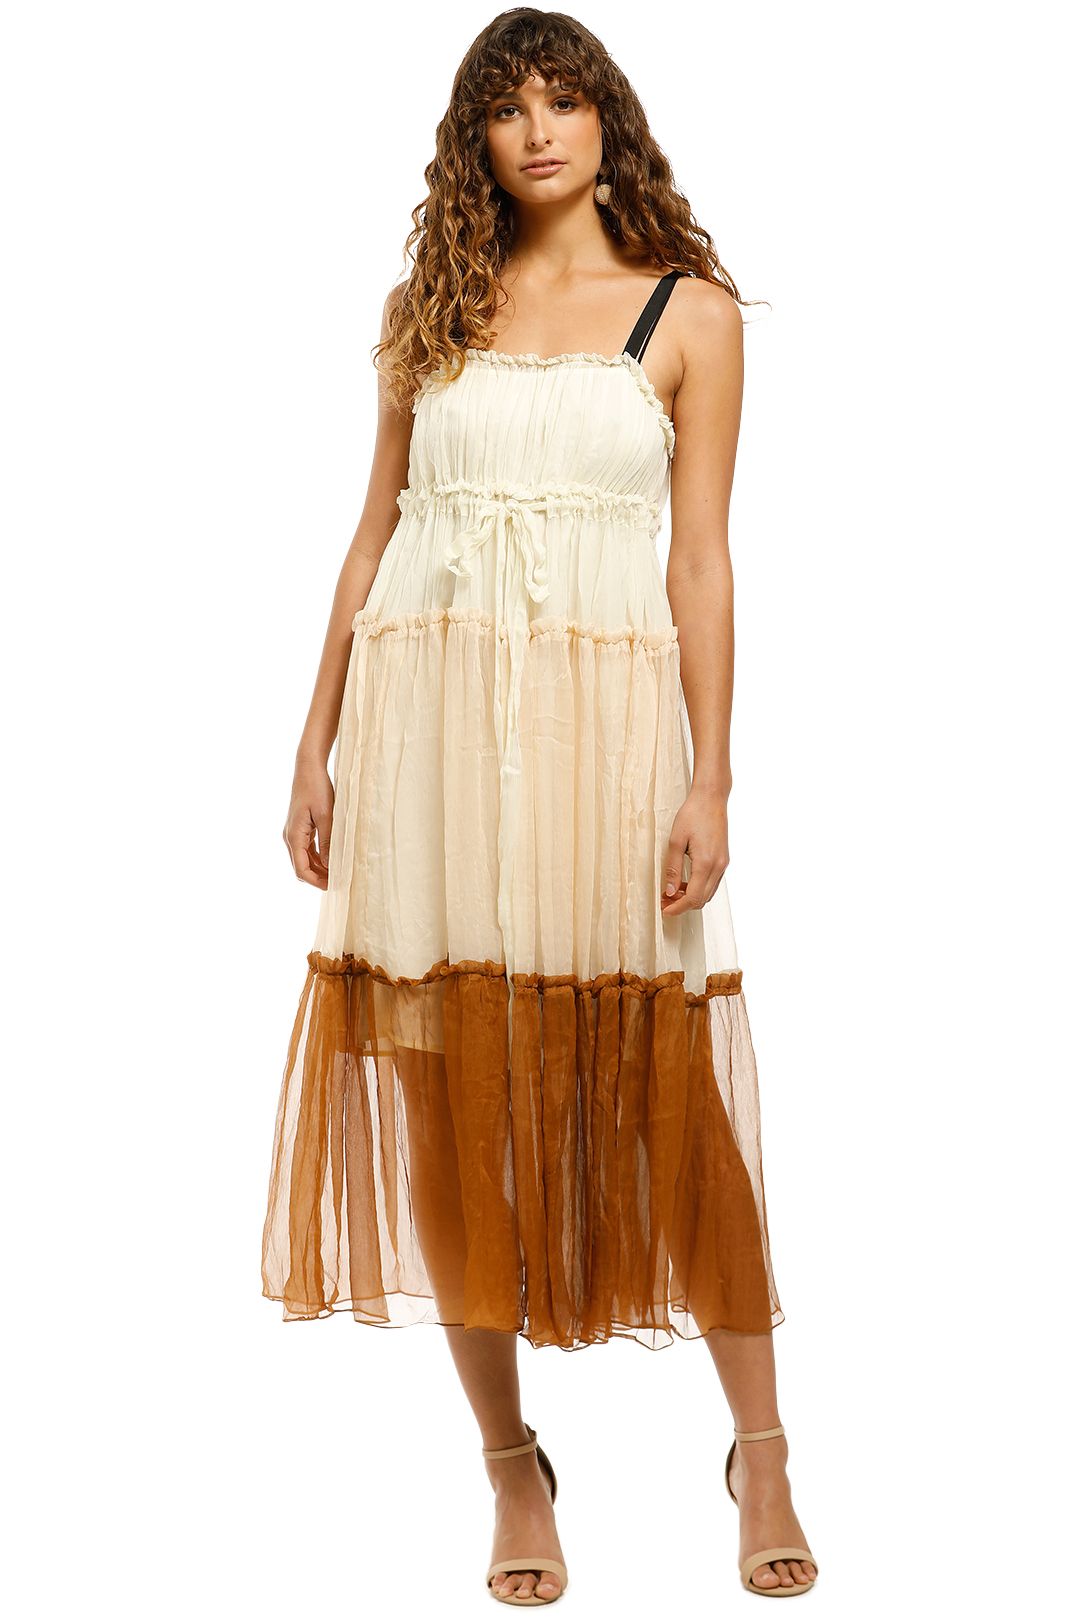 Ministry-of-Style-The-Prairie-Girl-Maxi-Dress-Cinnamon-Front